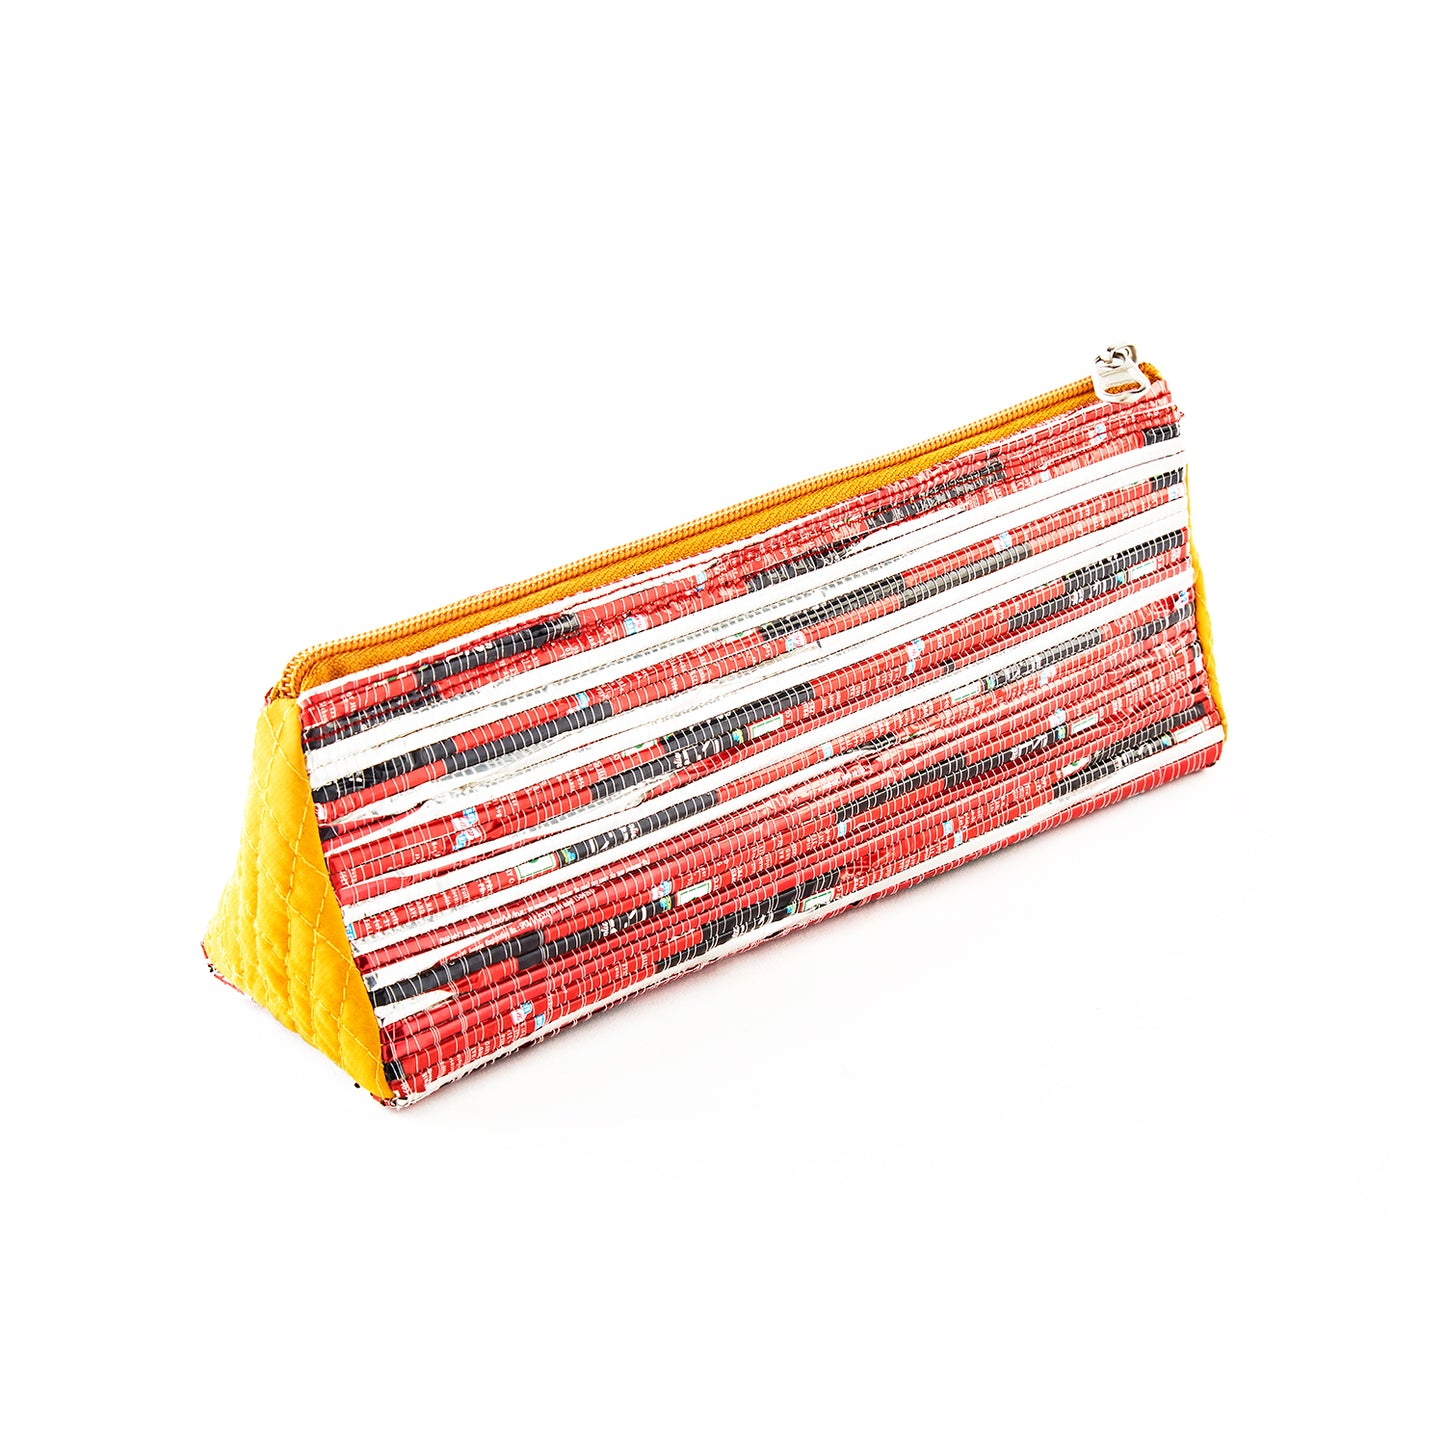 Red, Black, & Silver Recycled Plastic Pencil Pouch (MLP Plastic)